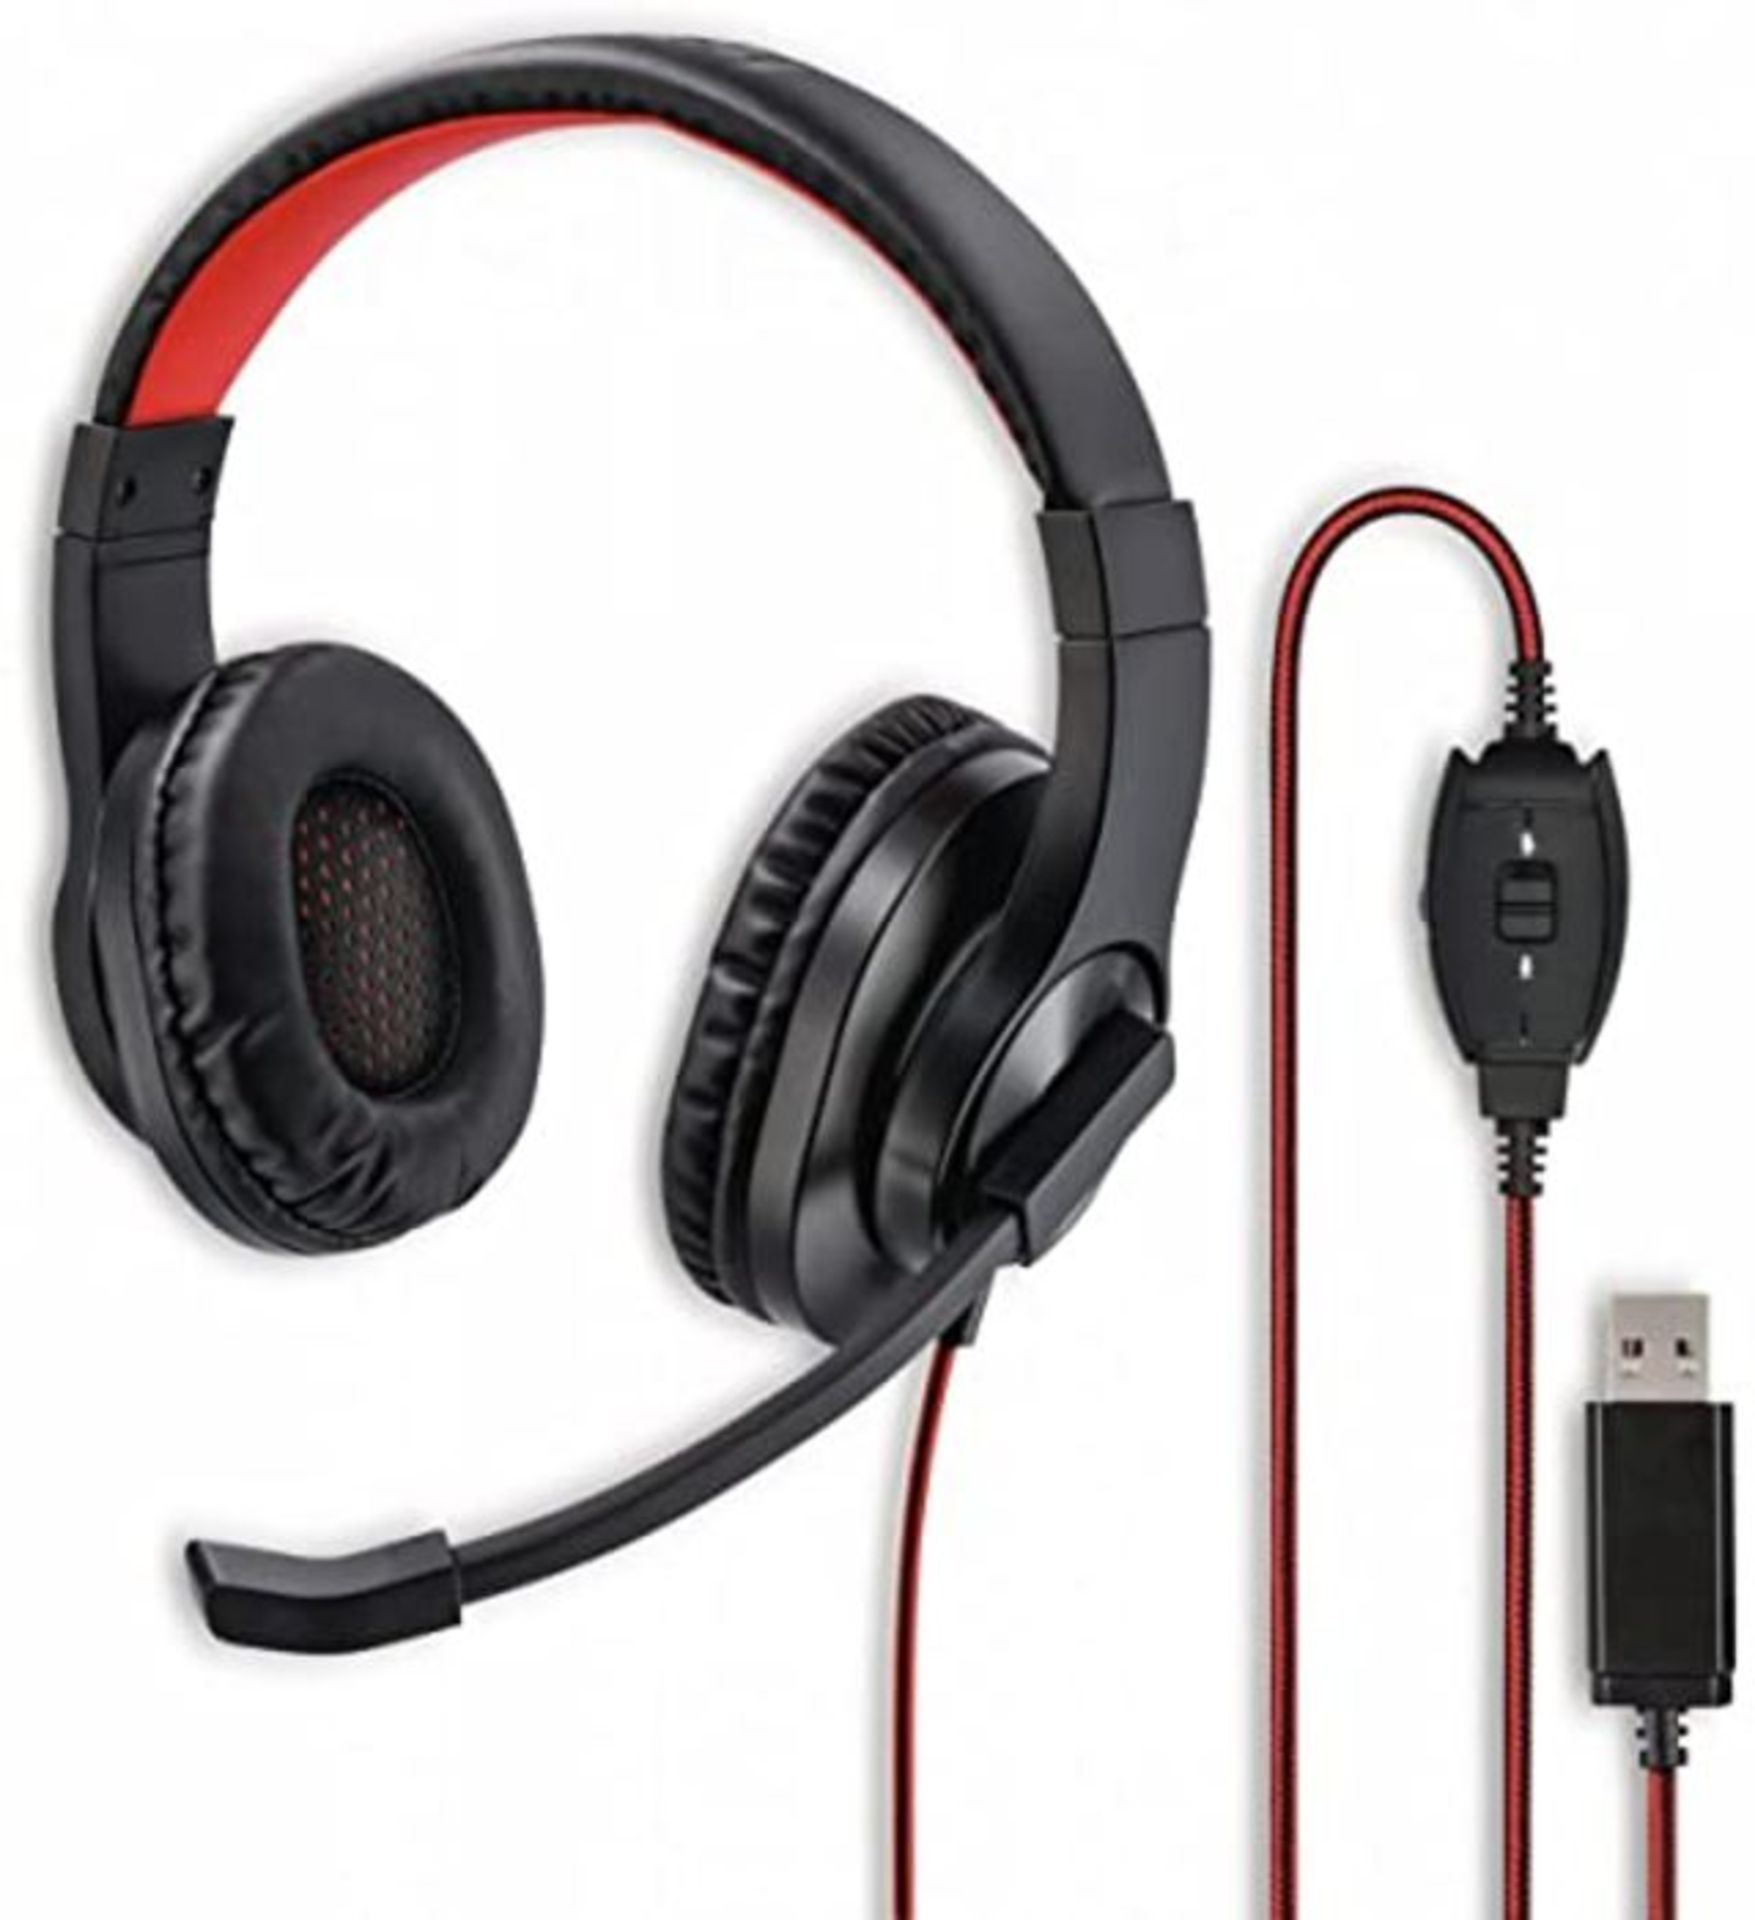 Hama USB Headset, Over Ear Headphones with Microphone (Headset with Volume Control and